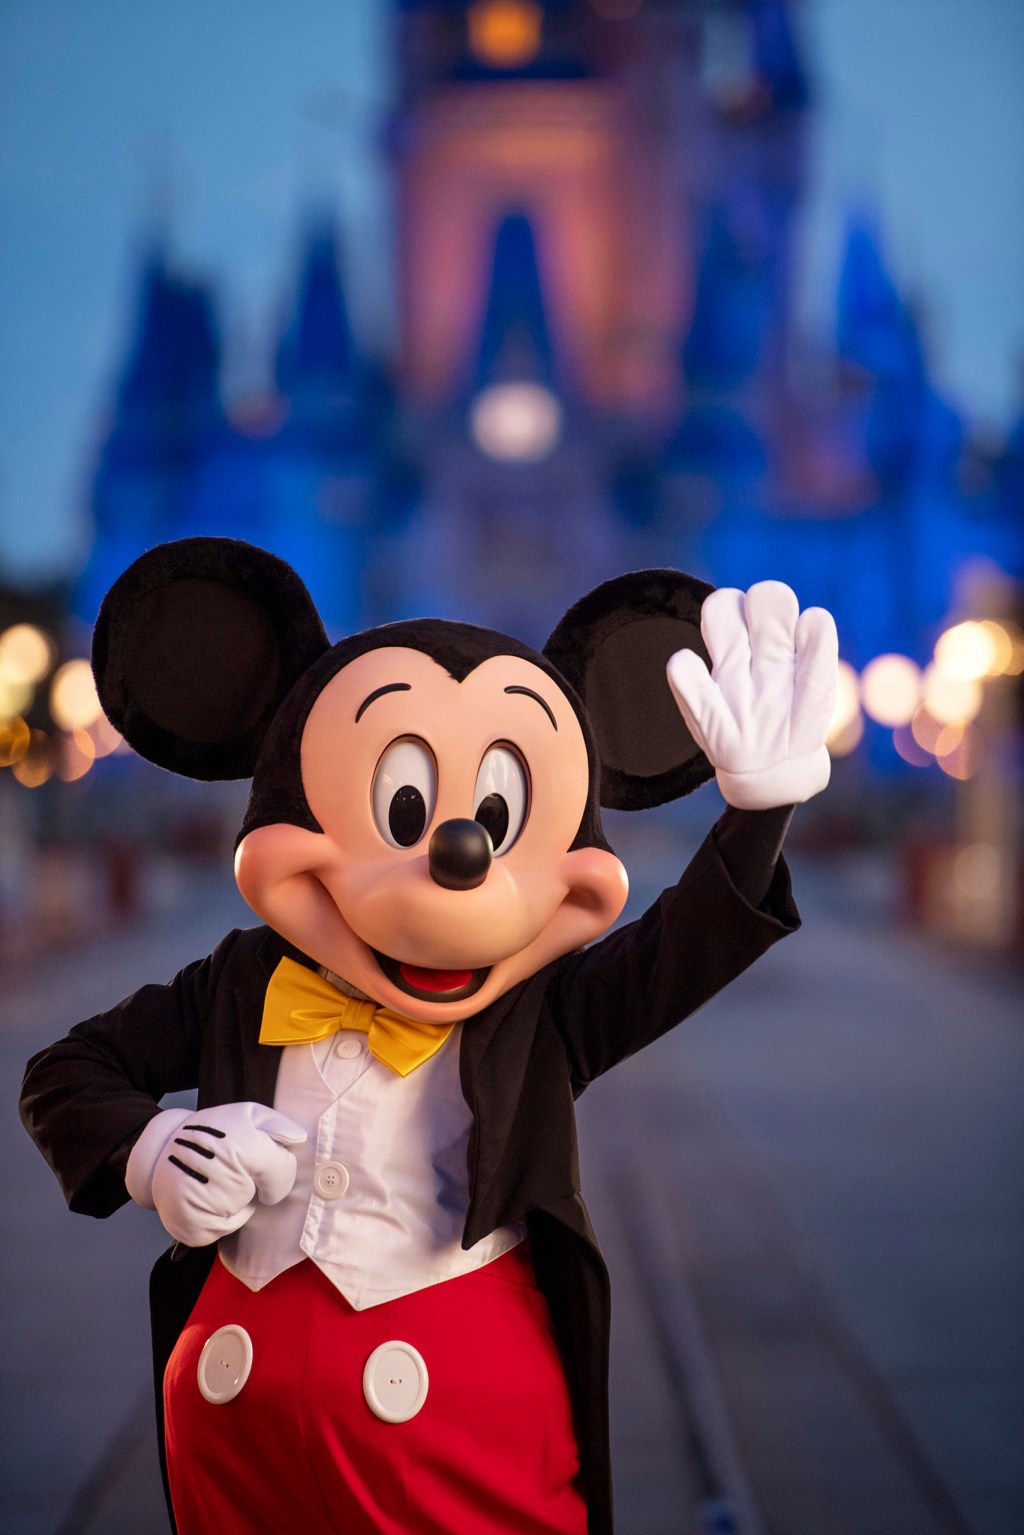 LAKE BUENA VISTA, FL - JULY 11: In this handout photo provided by Walt Disney World Resort, Mickey Mouse pauses on Main Street, U.S.A. just before sunrise at Walt Disney World Resort on July 11, 2020 in Lake Buena Vista, Florida. (Photo by Kent Phillips/Walt Disney World Resort via Getty Images)